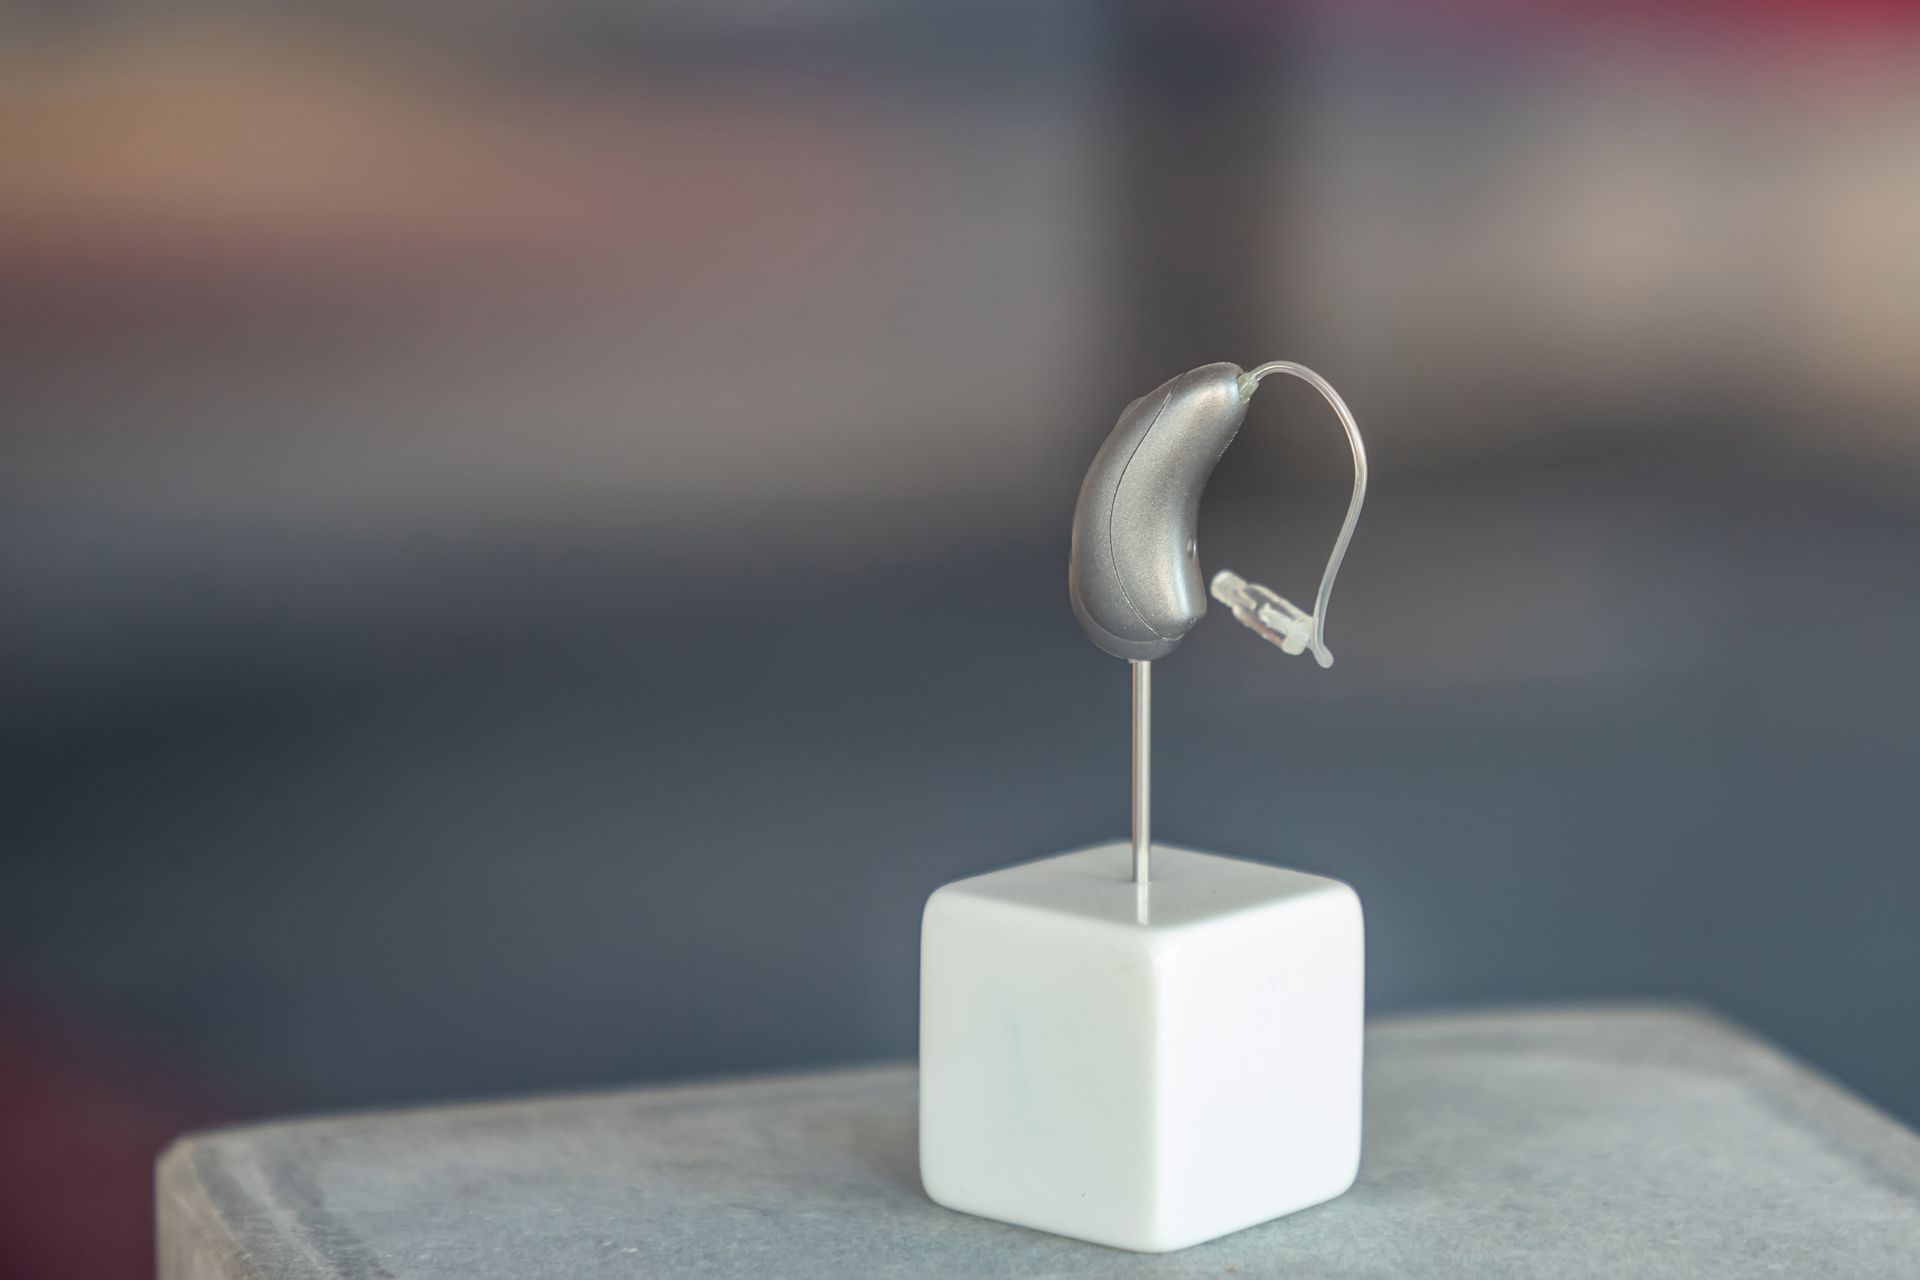 A hearing aid is sitting on top of a white cube on a table.